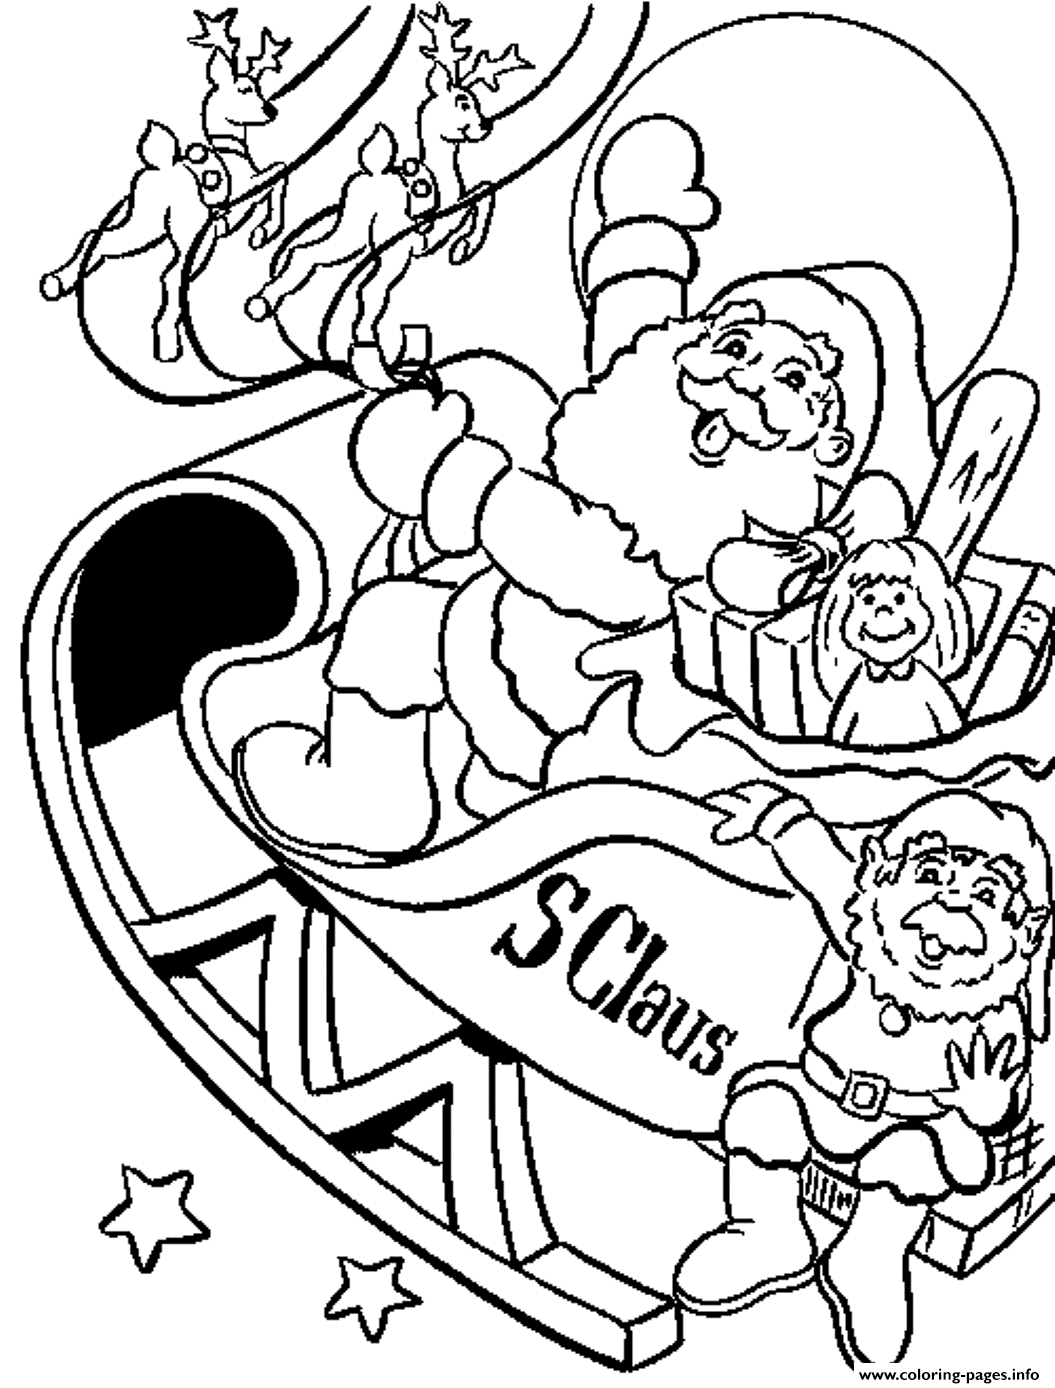 Coloring Pages Of Santa Claus Flying With His Sleigh8c31 coloring